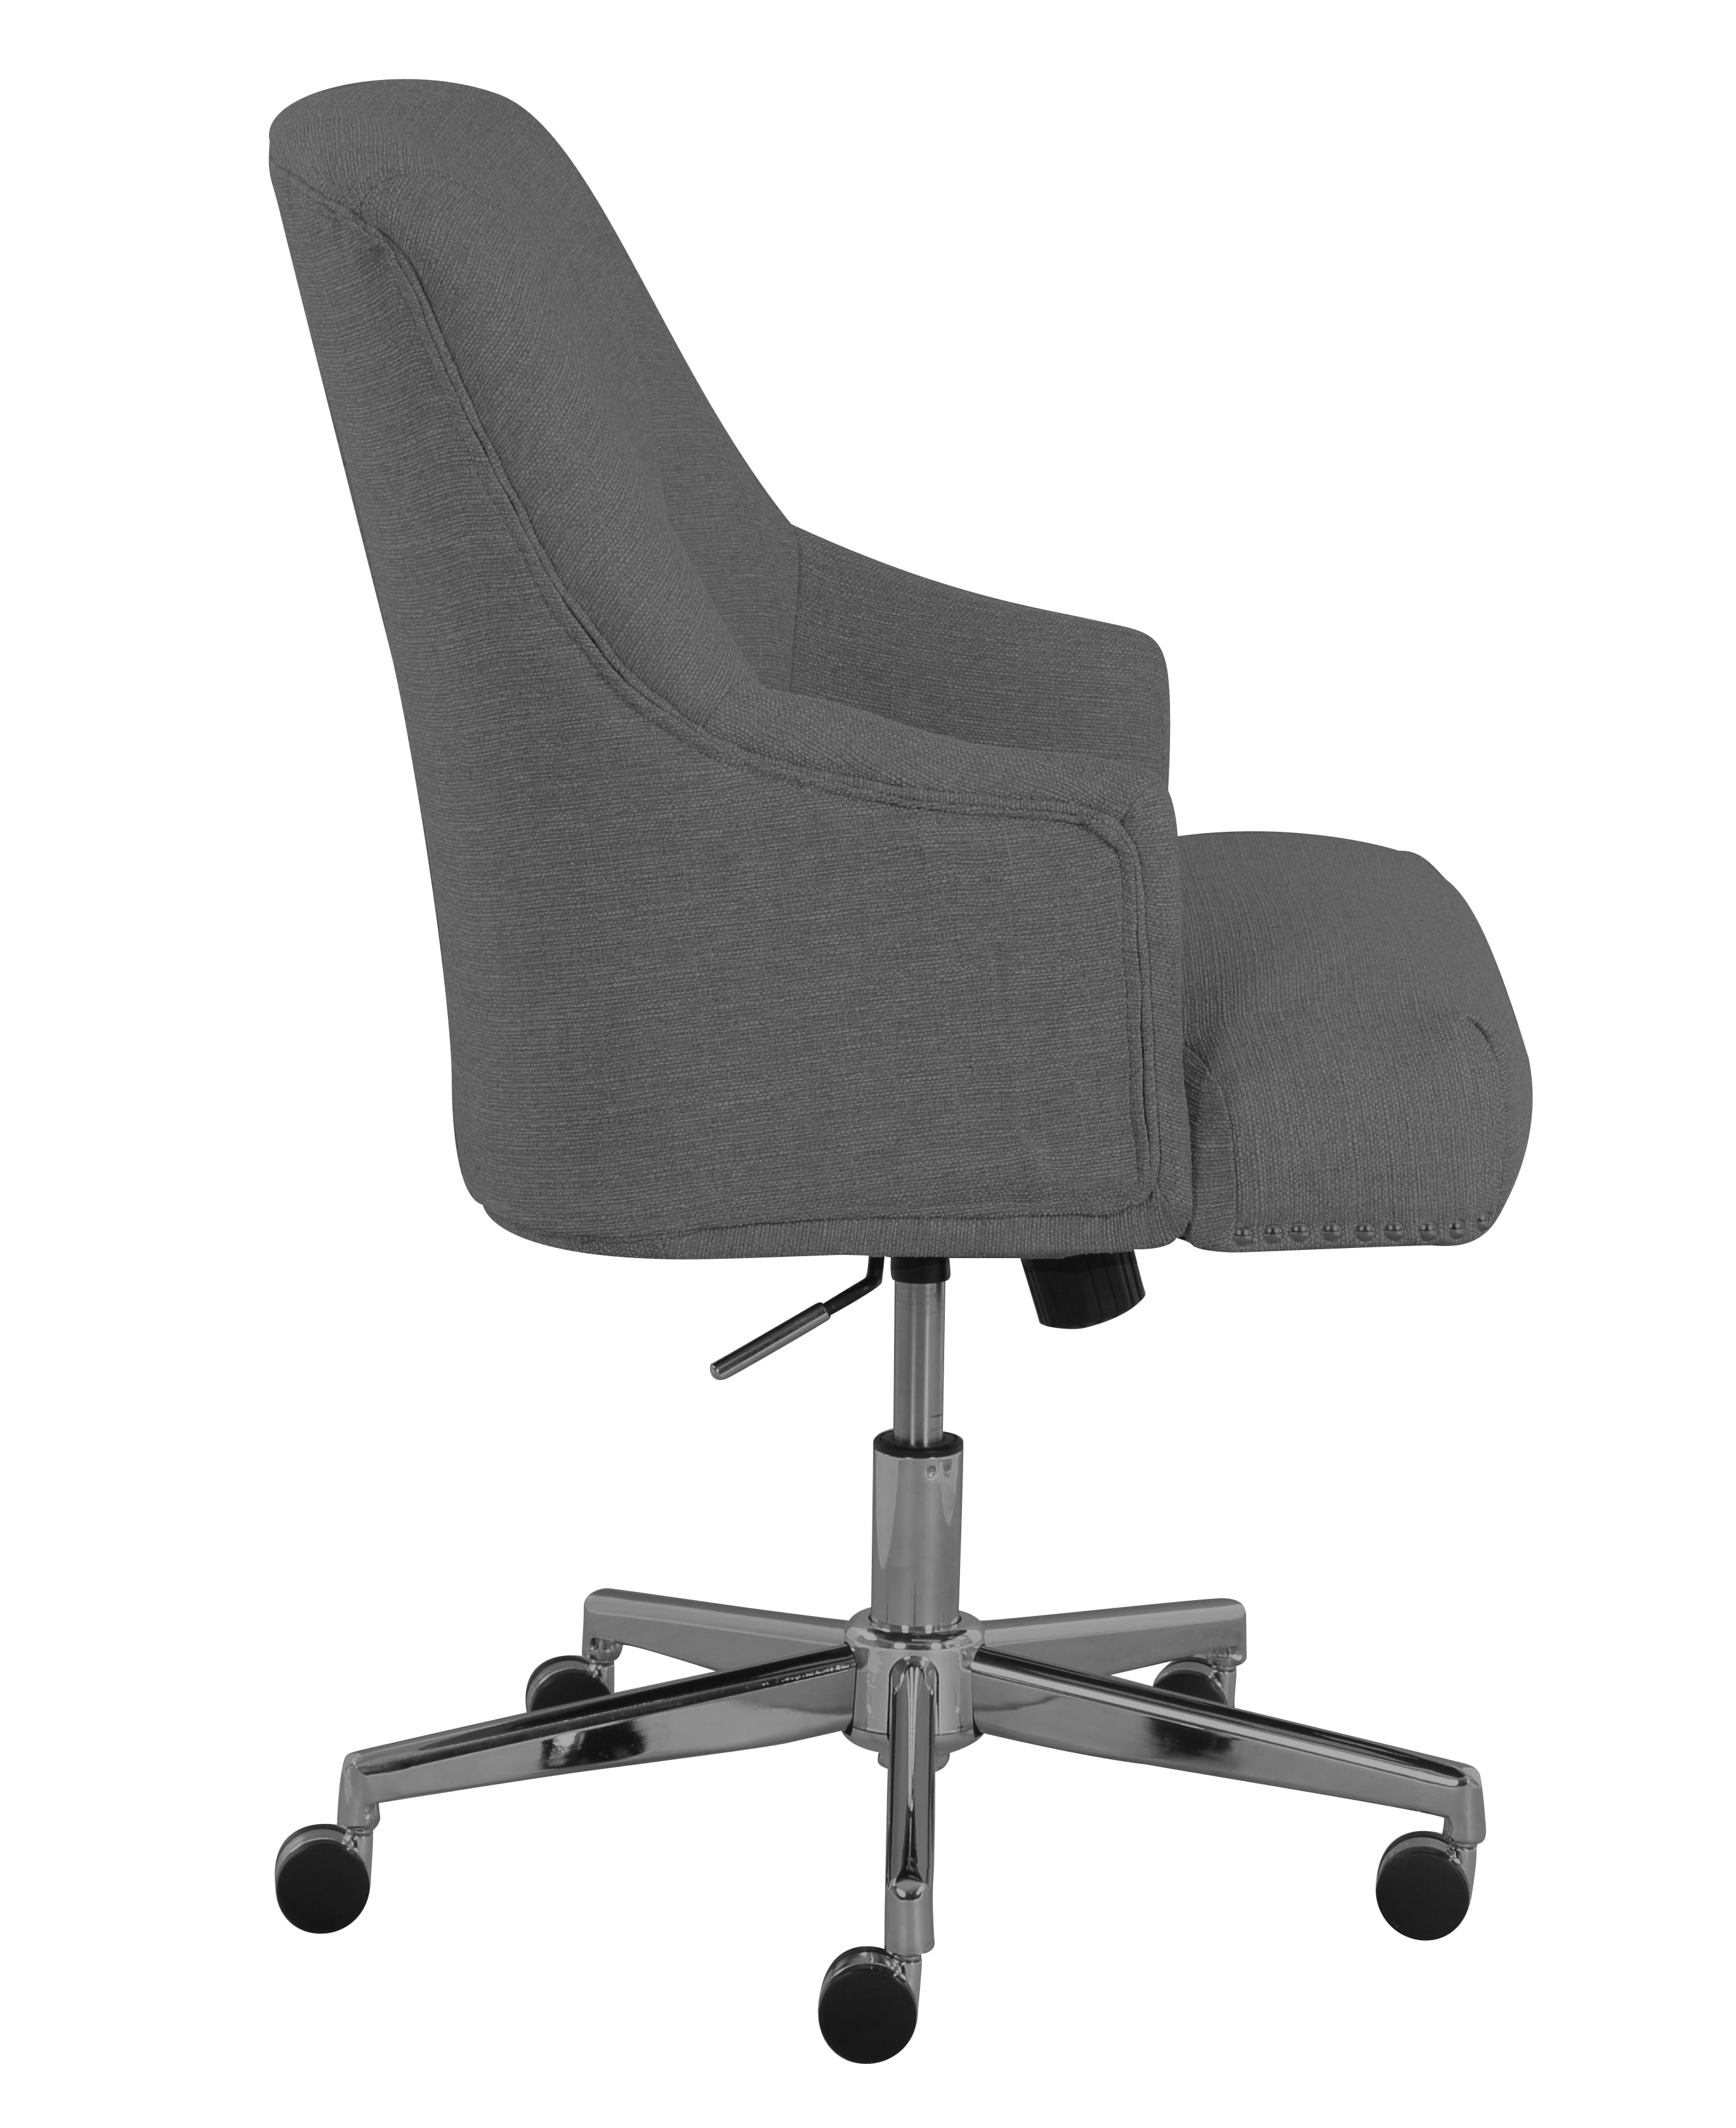 Serta at Home 48371 Leighton Home Office Chair, Light Gray